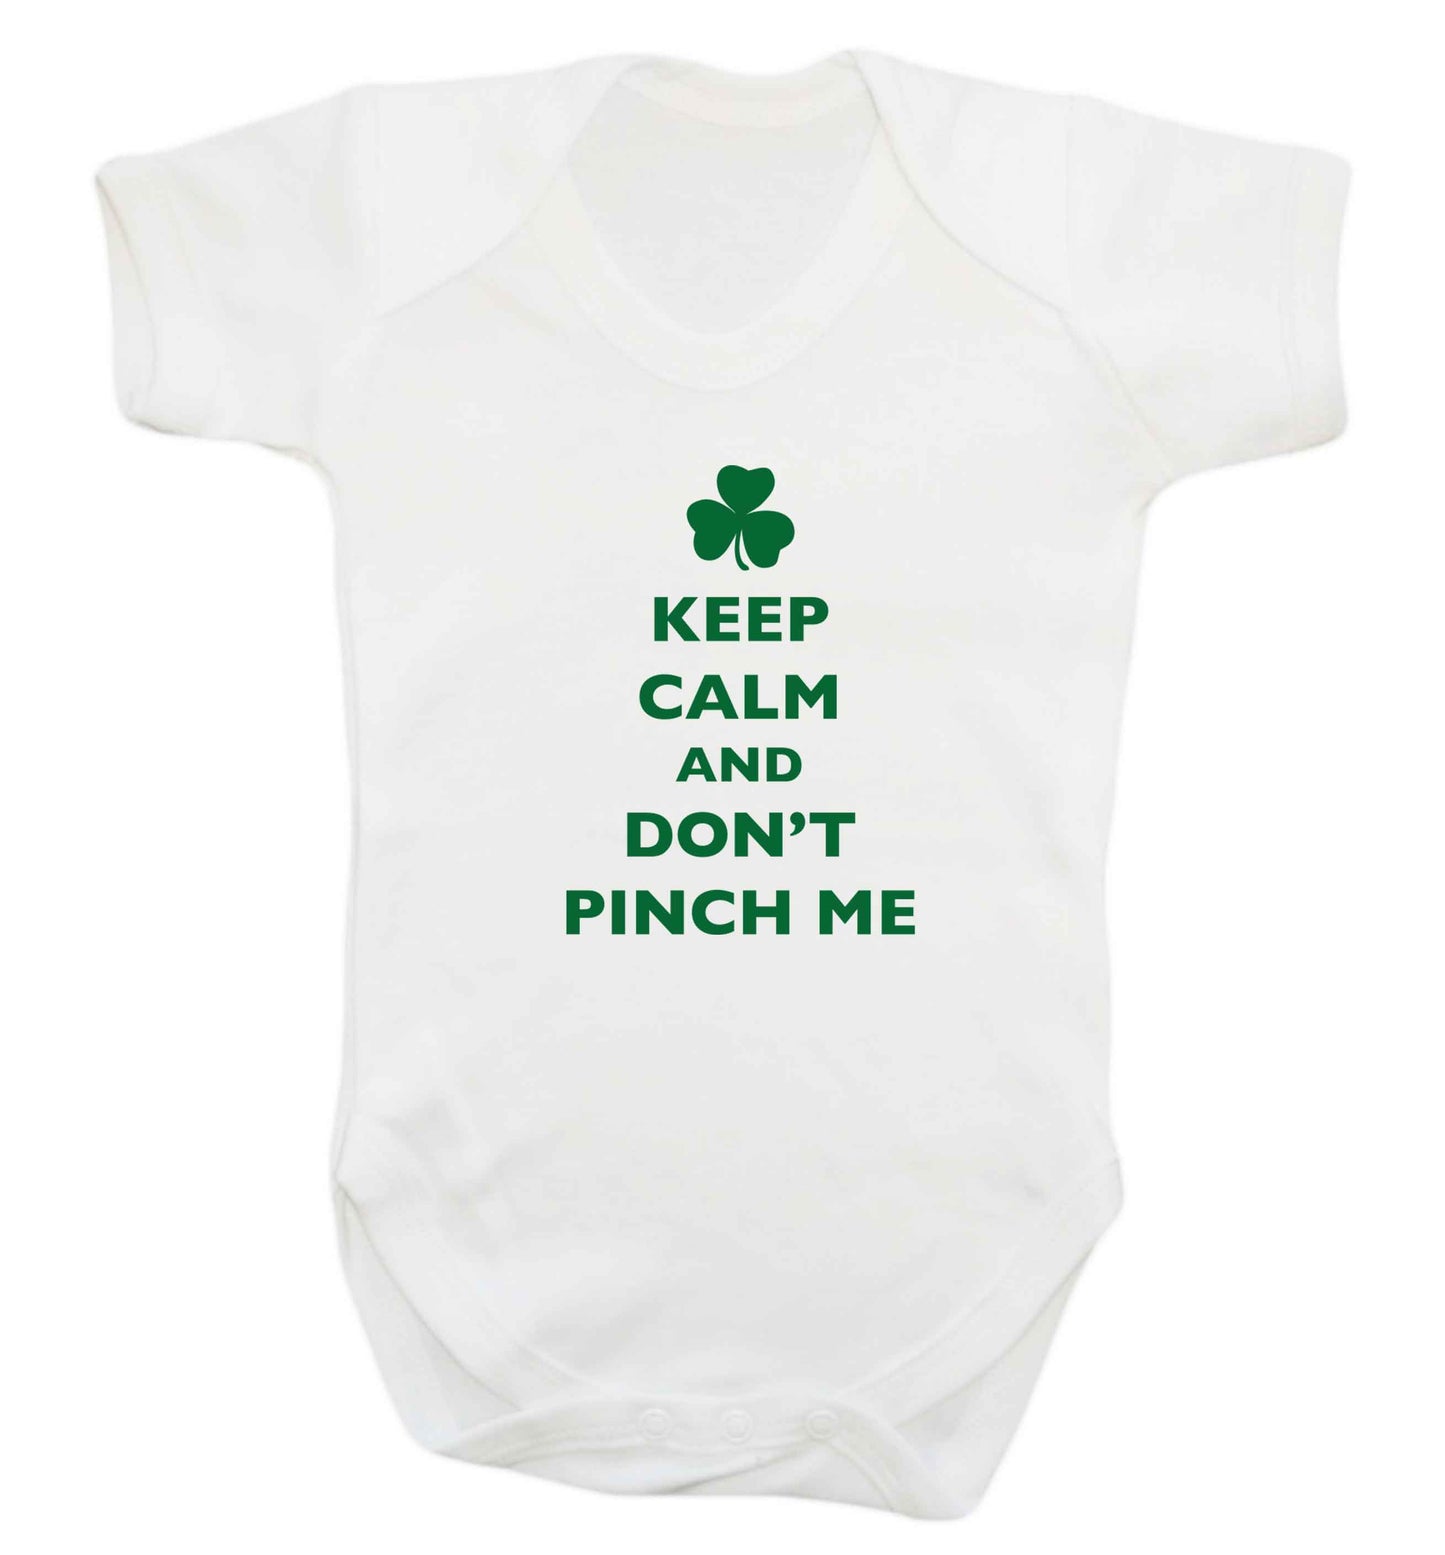 Keep calm and don't pinch me baby vest white 18-24 months